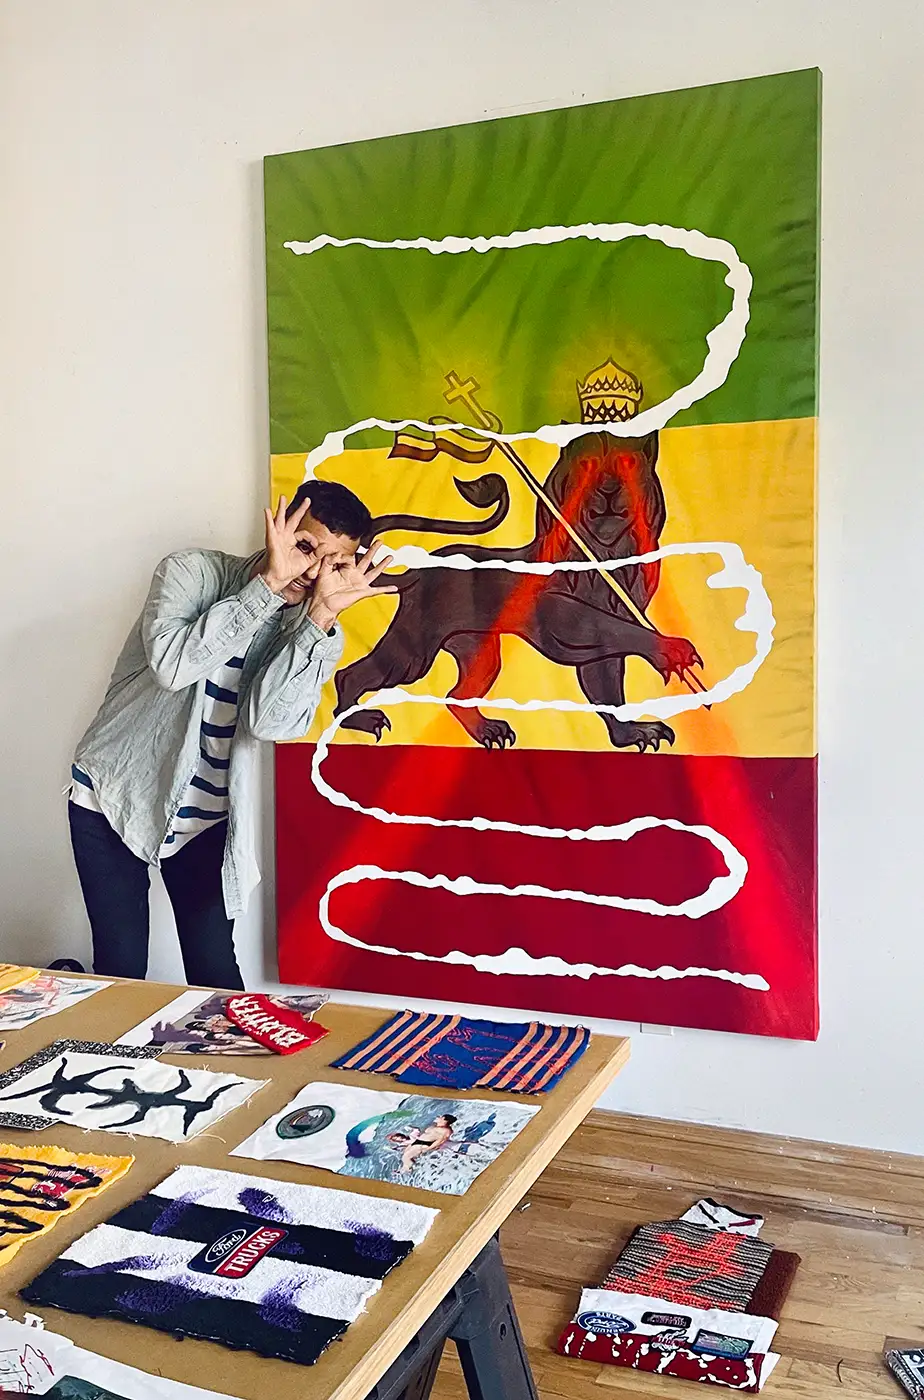 carlos charlie perez artist in his studio for munchies art club magazine spotlight on contemporary painting now redefine art